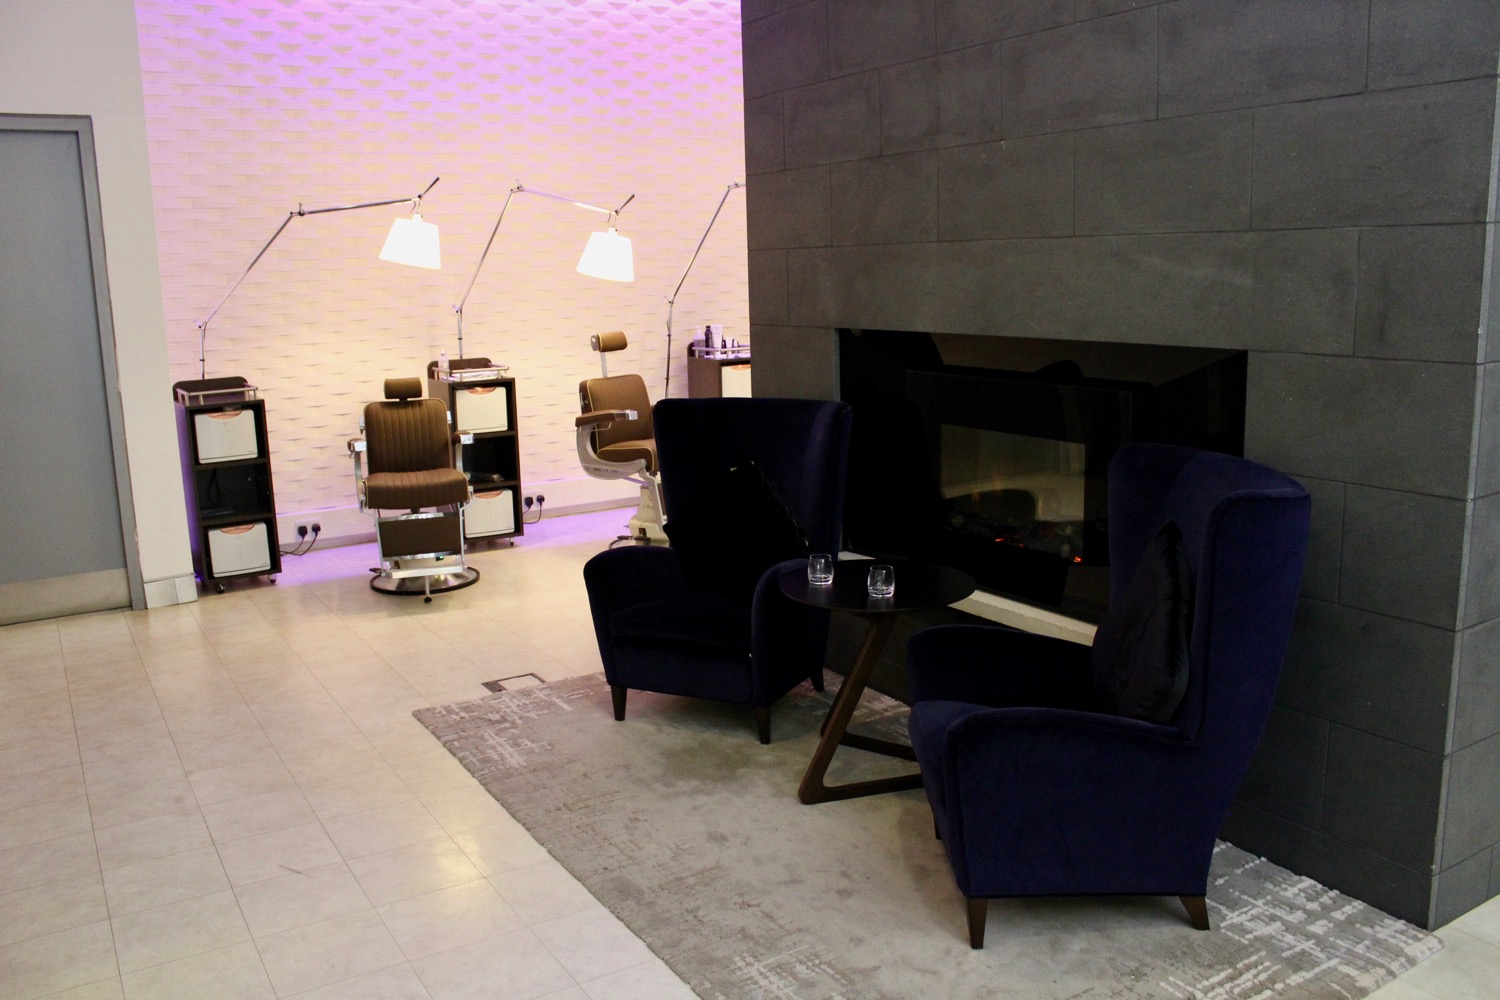 a room with chairs and a fireplace